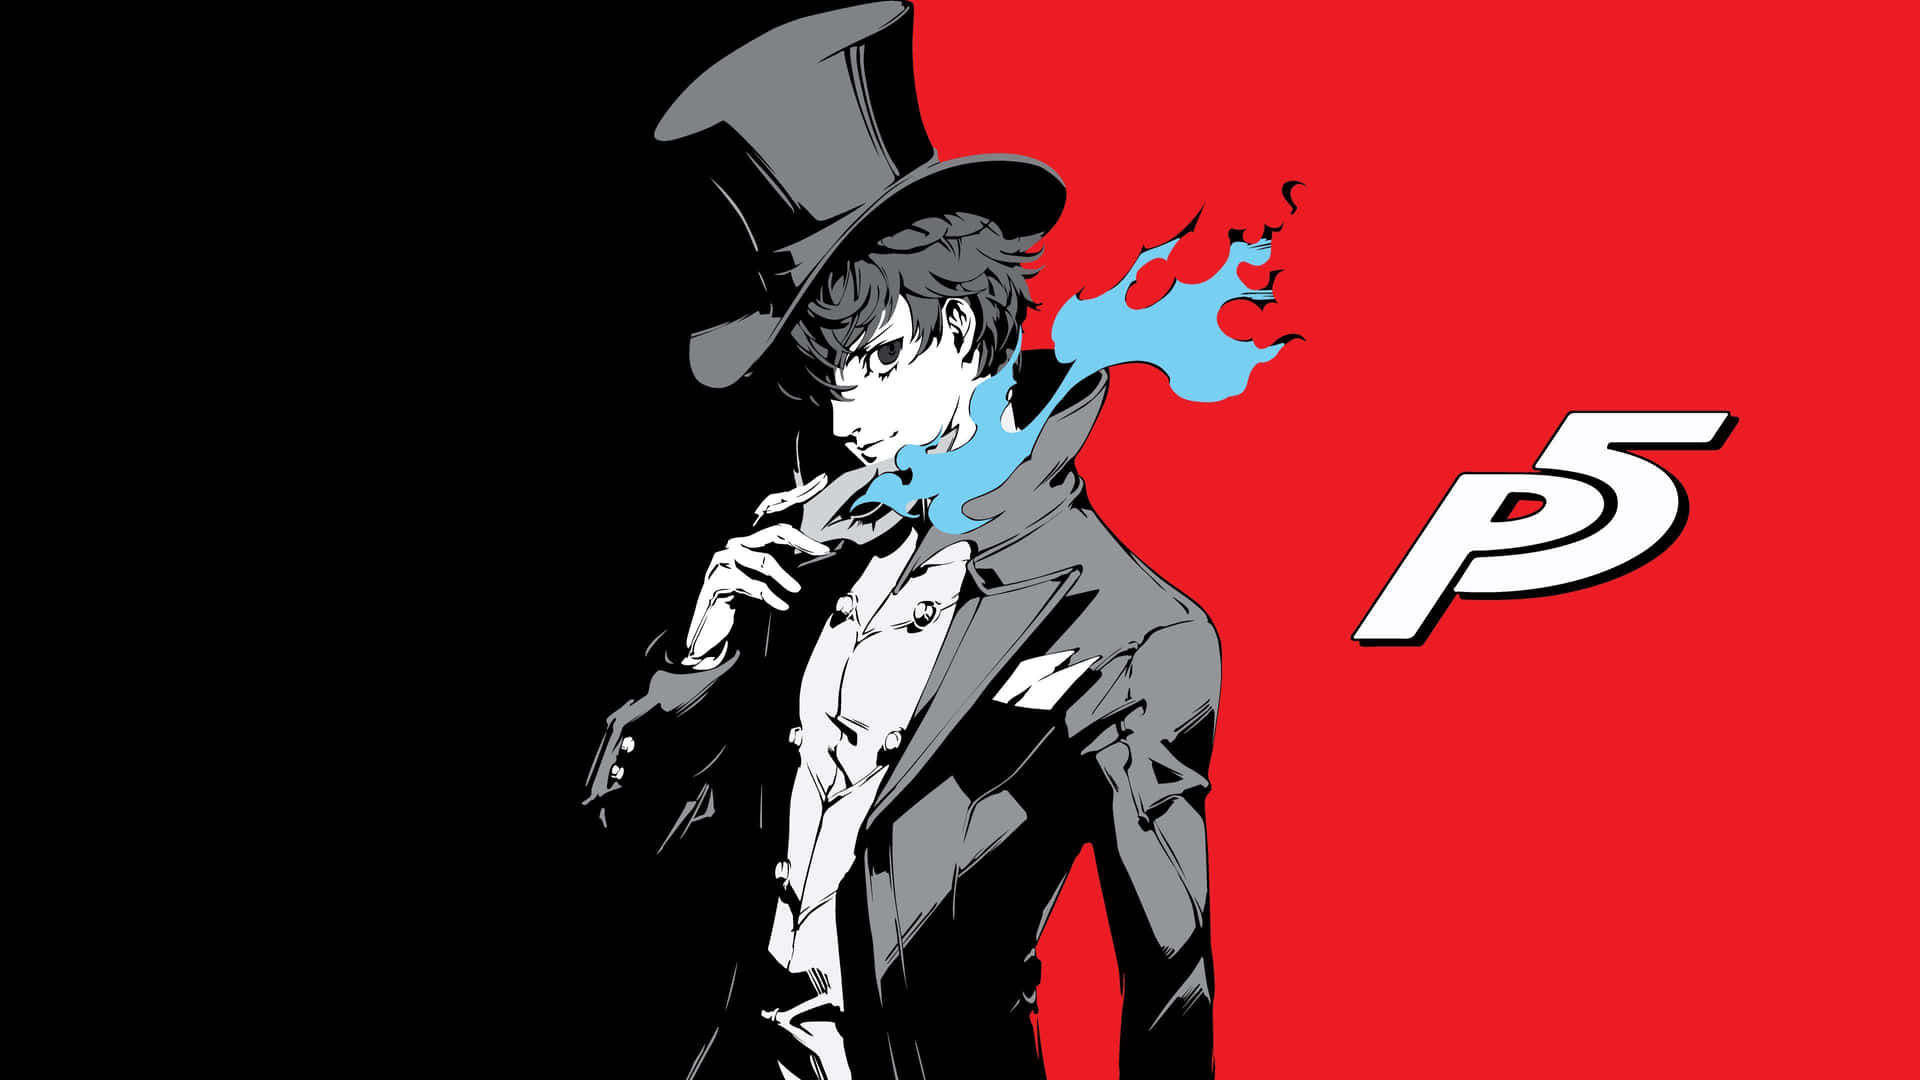 "Roleplay in style with the iconic Persona 5 Logo" Wallpaper